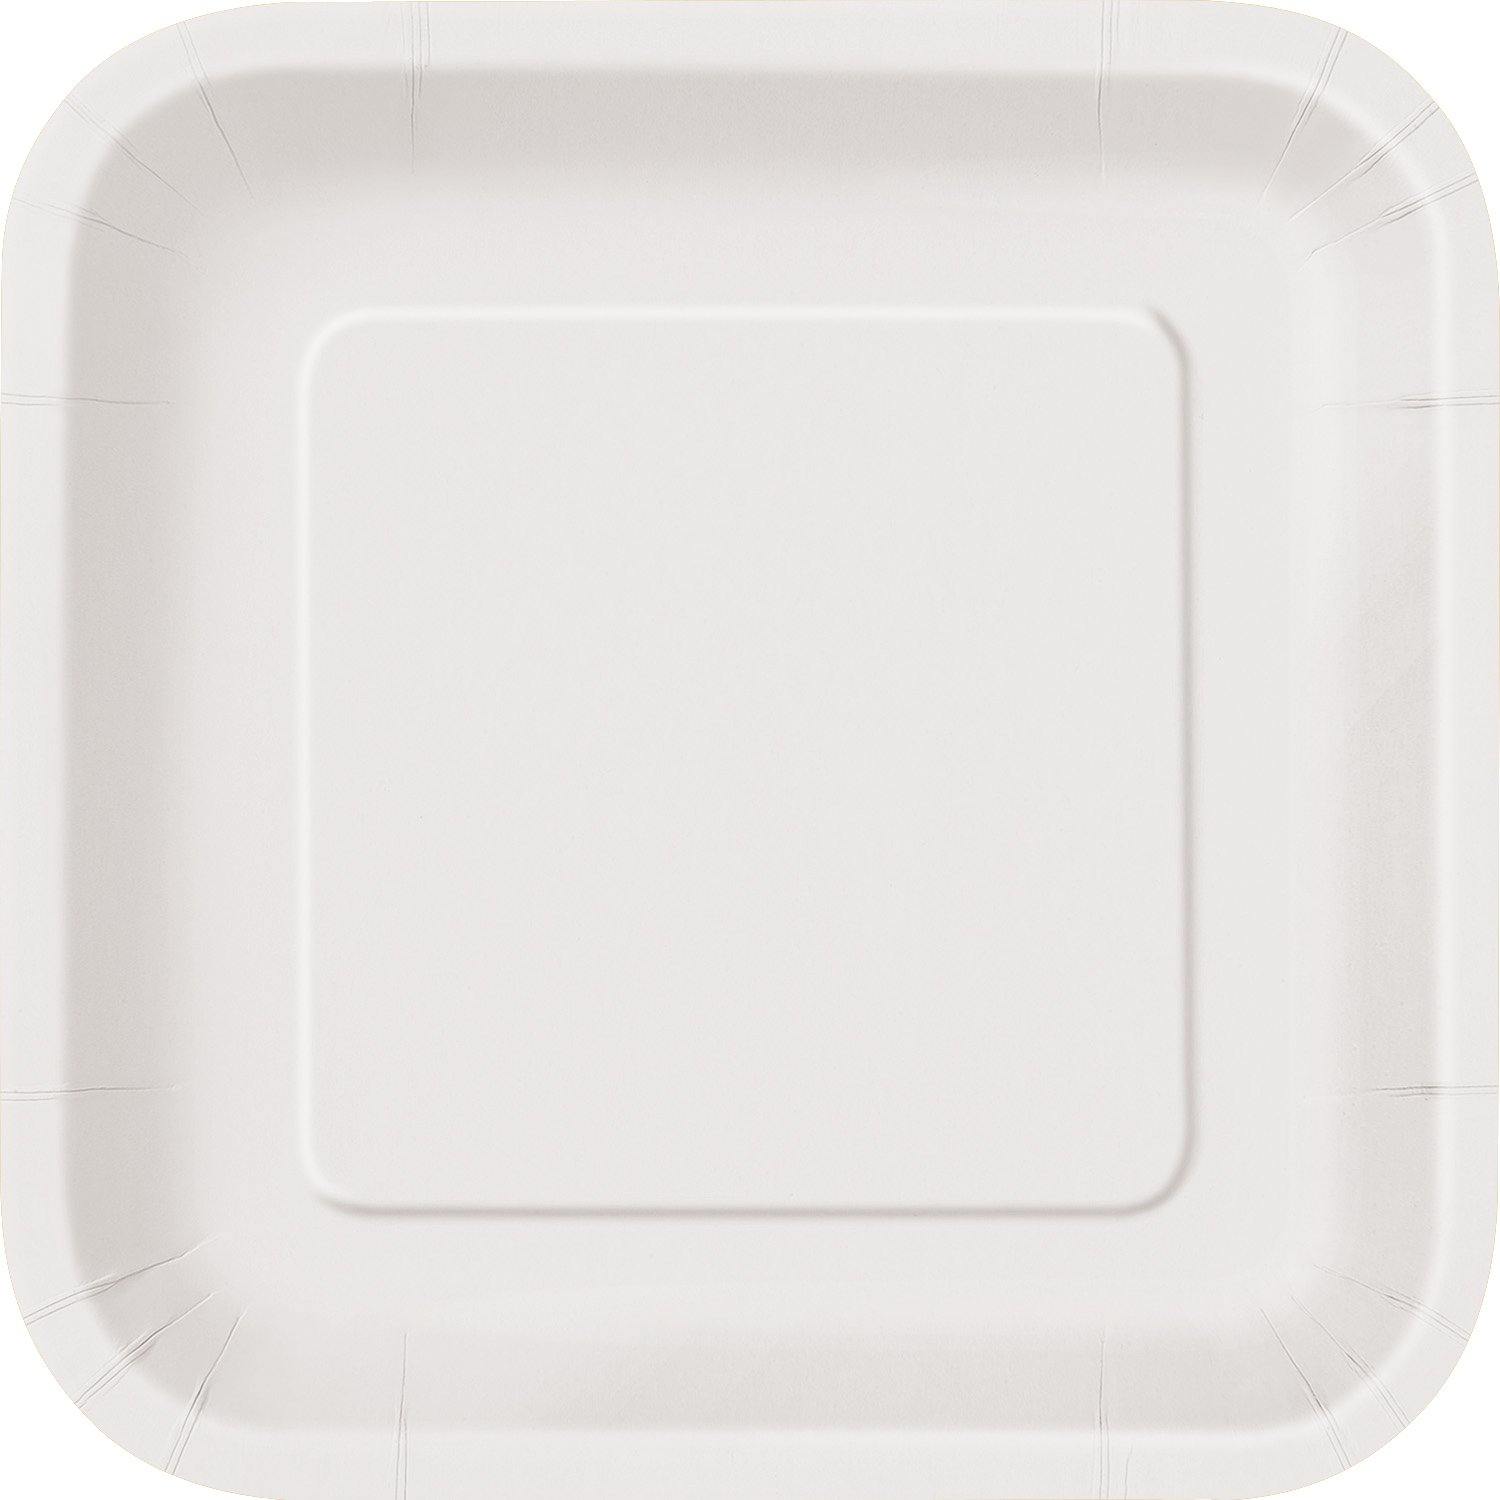 14 Pack Bright White Square Paper Plates - 22.2 cm - The Base Warehouse